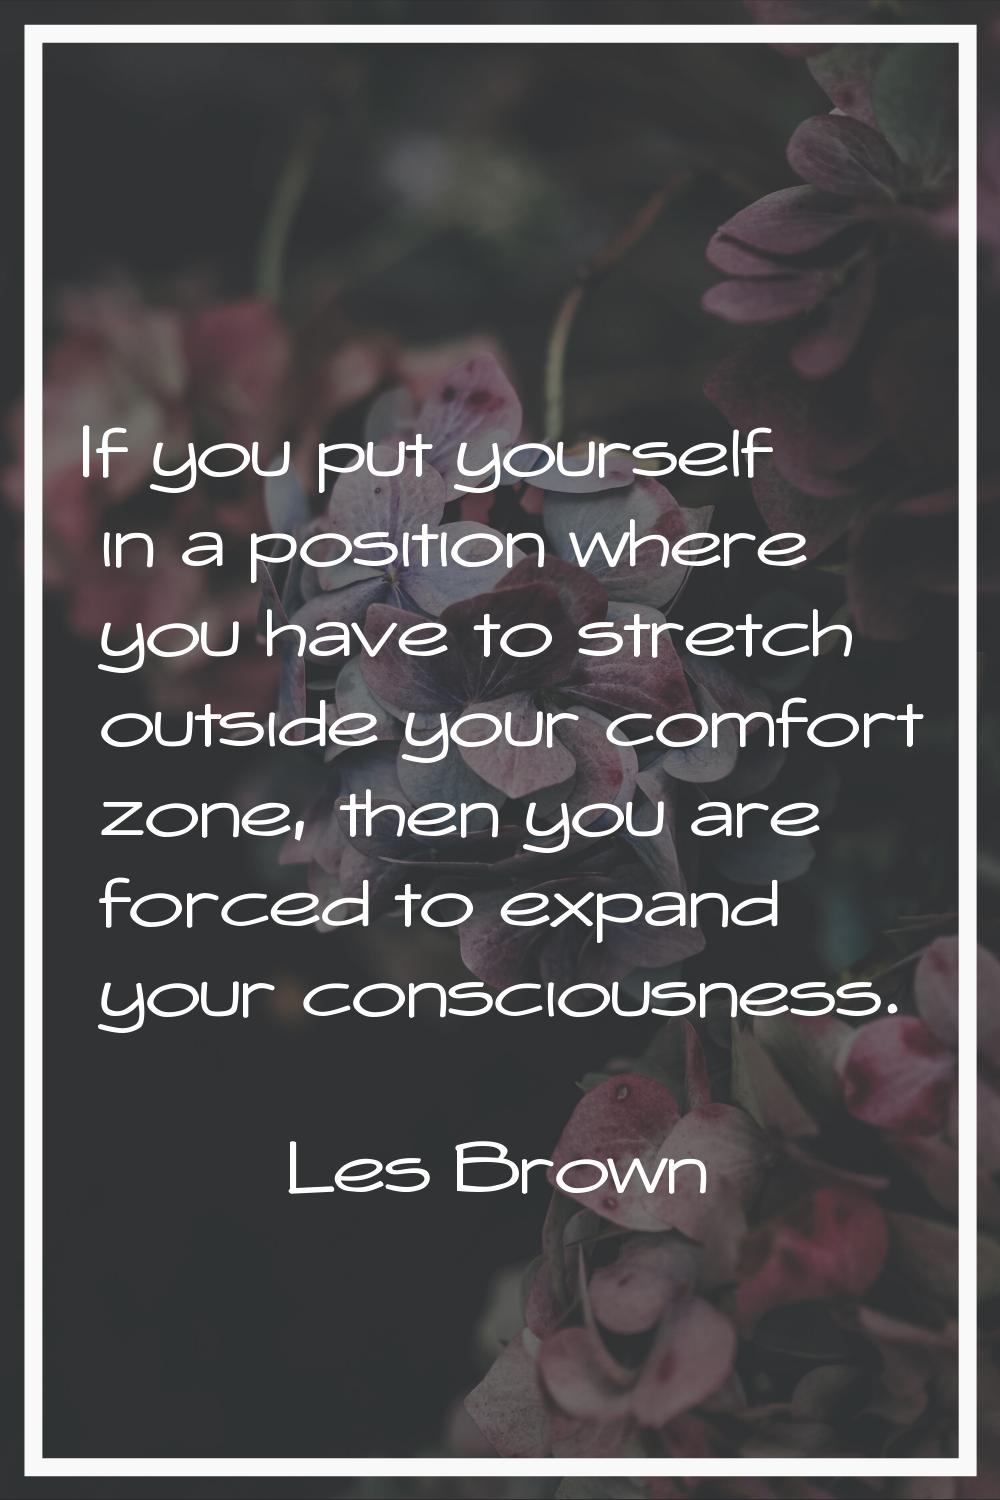 If you put yourself in a position where you have to stretch outside your comfort zone, then you are